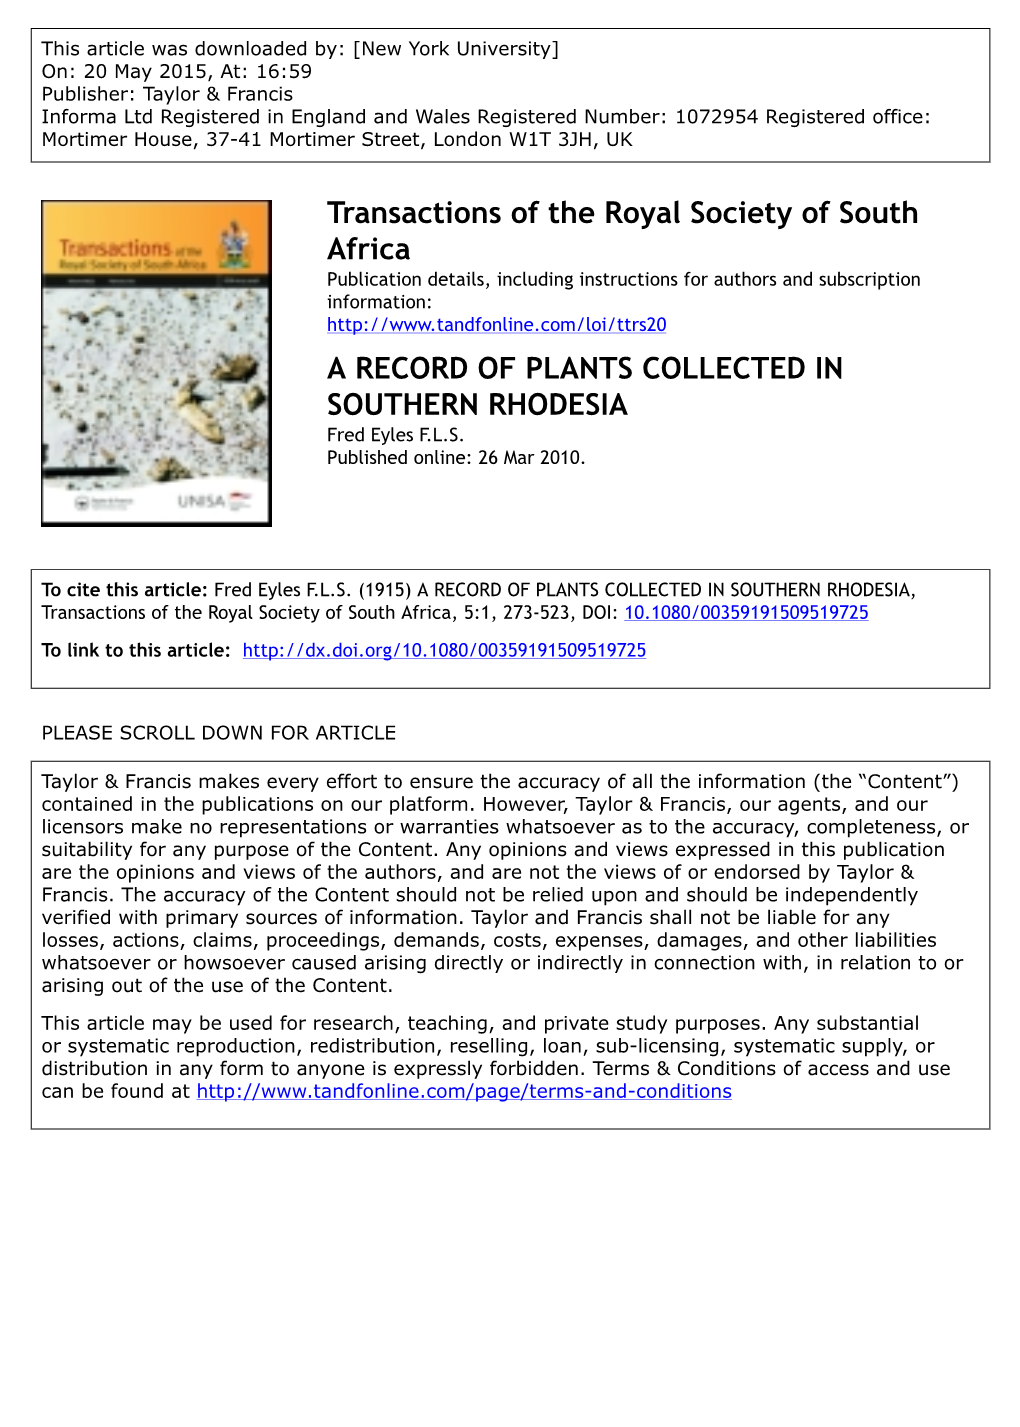 Transactions of the Royal Society of South Africa a RECORD OF